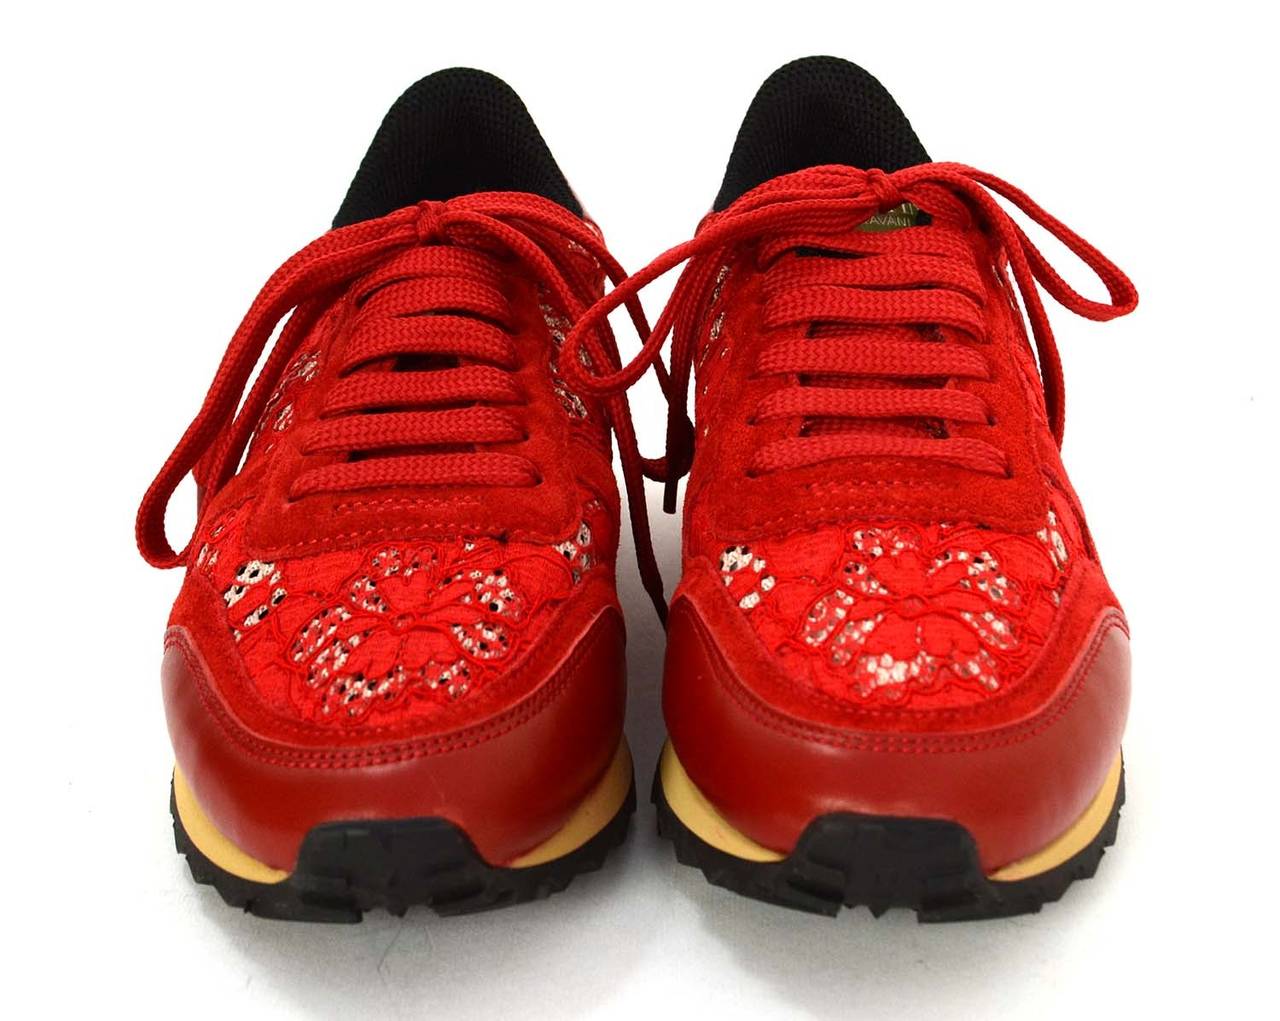 Valentino Red Suede & Lace Sneakers
Features rubber rockstuds around heel
Made in: Italy
Color: Red and tan
Composition: Suede, lace and rubber
Sole Stamp: VALENTINO GARAVANI Made in Italy
Closure/opening: Laces
Overall Condition: Excellent-